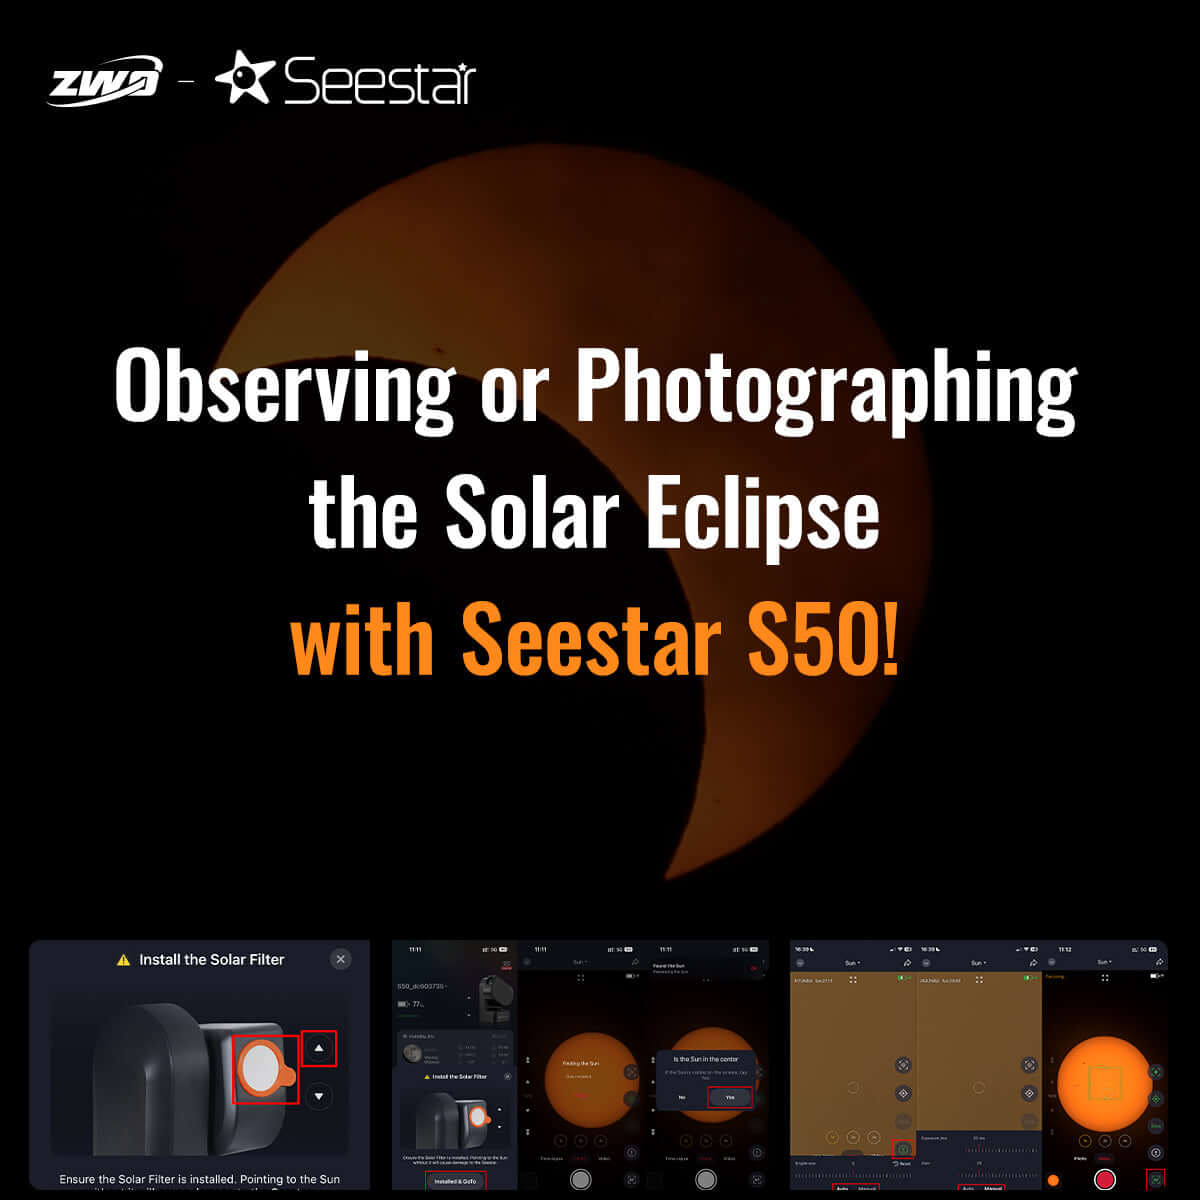 All You Need to Know About Observing or Photographing the Solar Eclipse with Seestar S50!